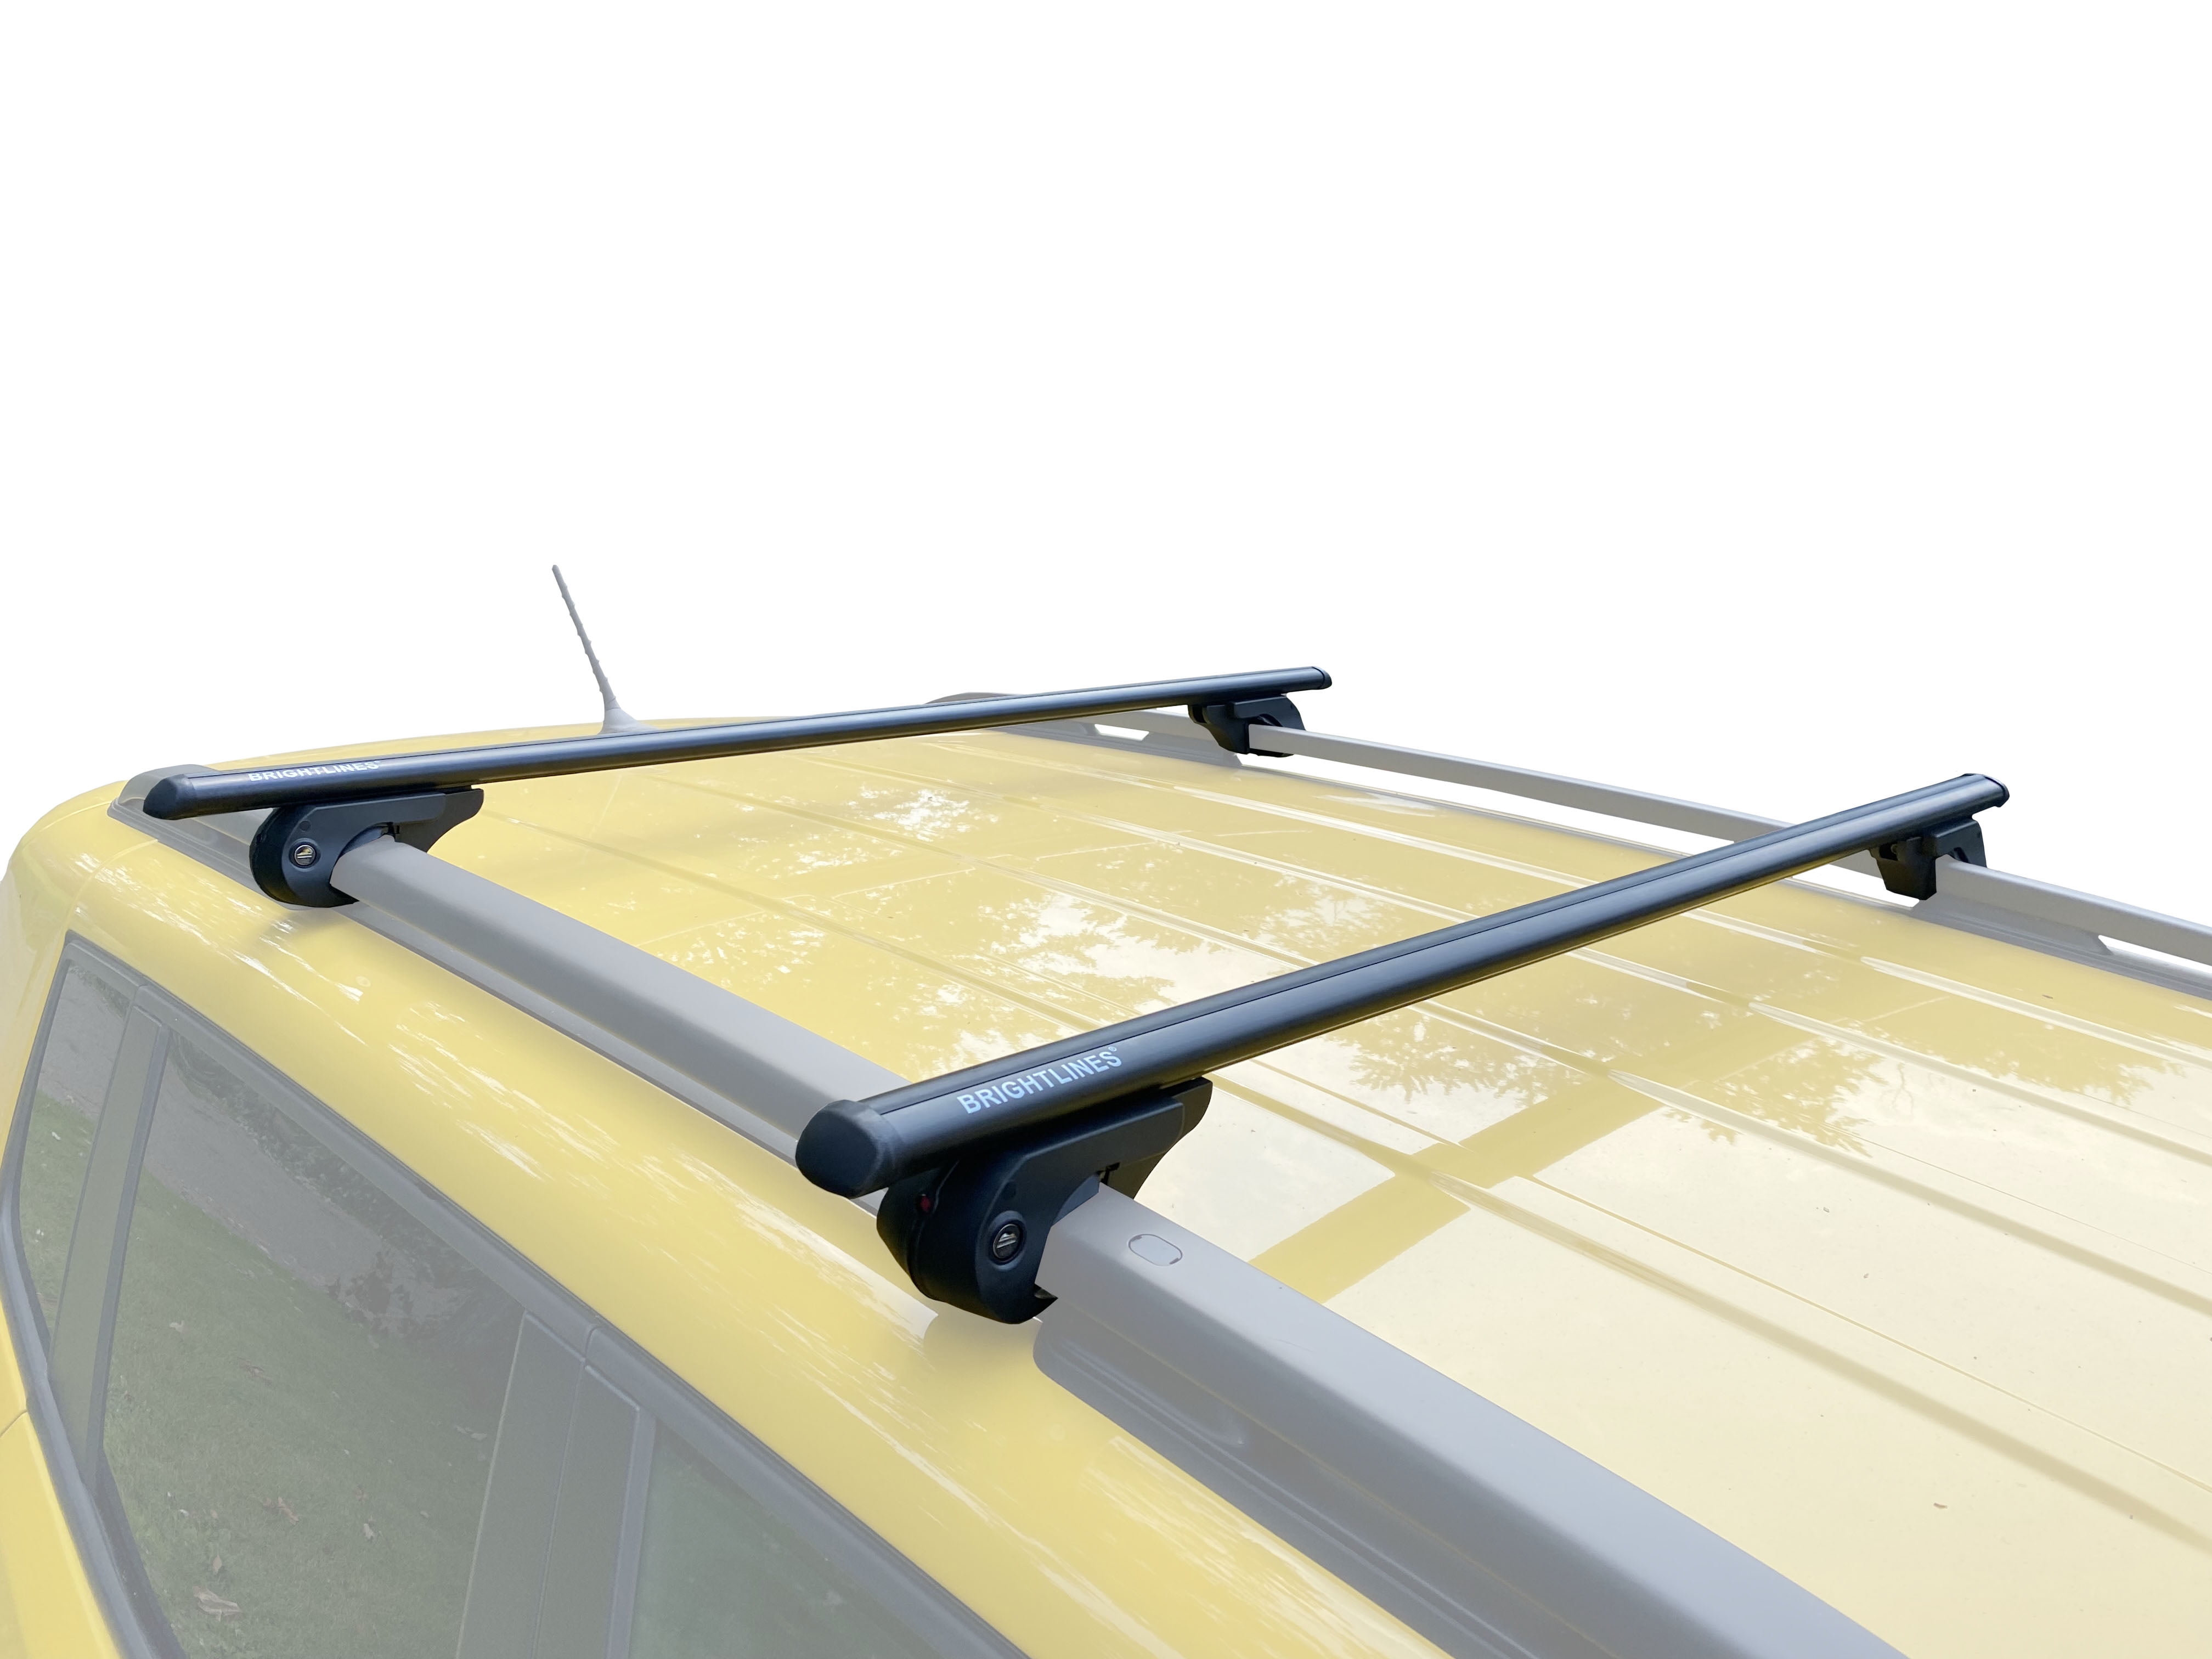 ERKUL Universal Roof Rack Cross Bars for Car's w/Out Rails Up to 49  Adjustable